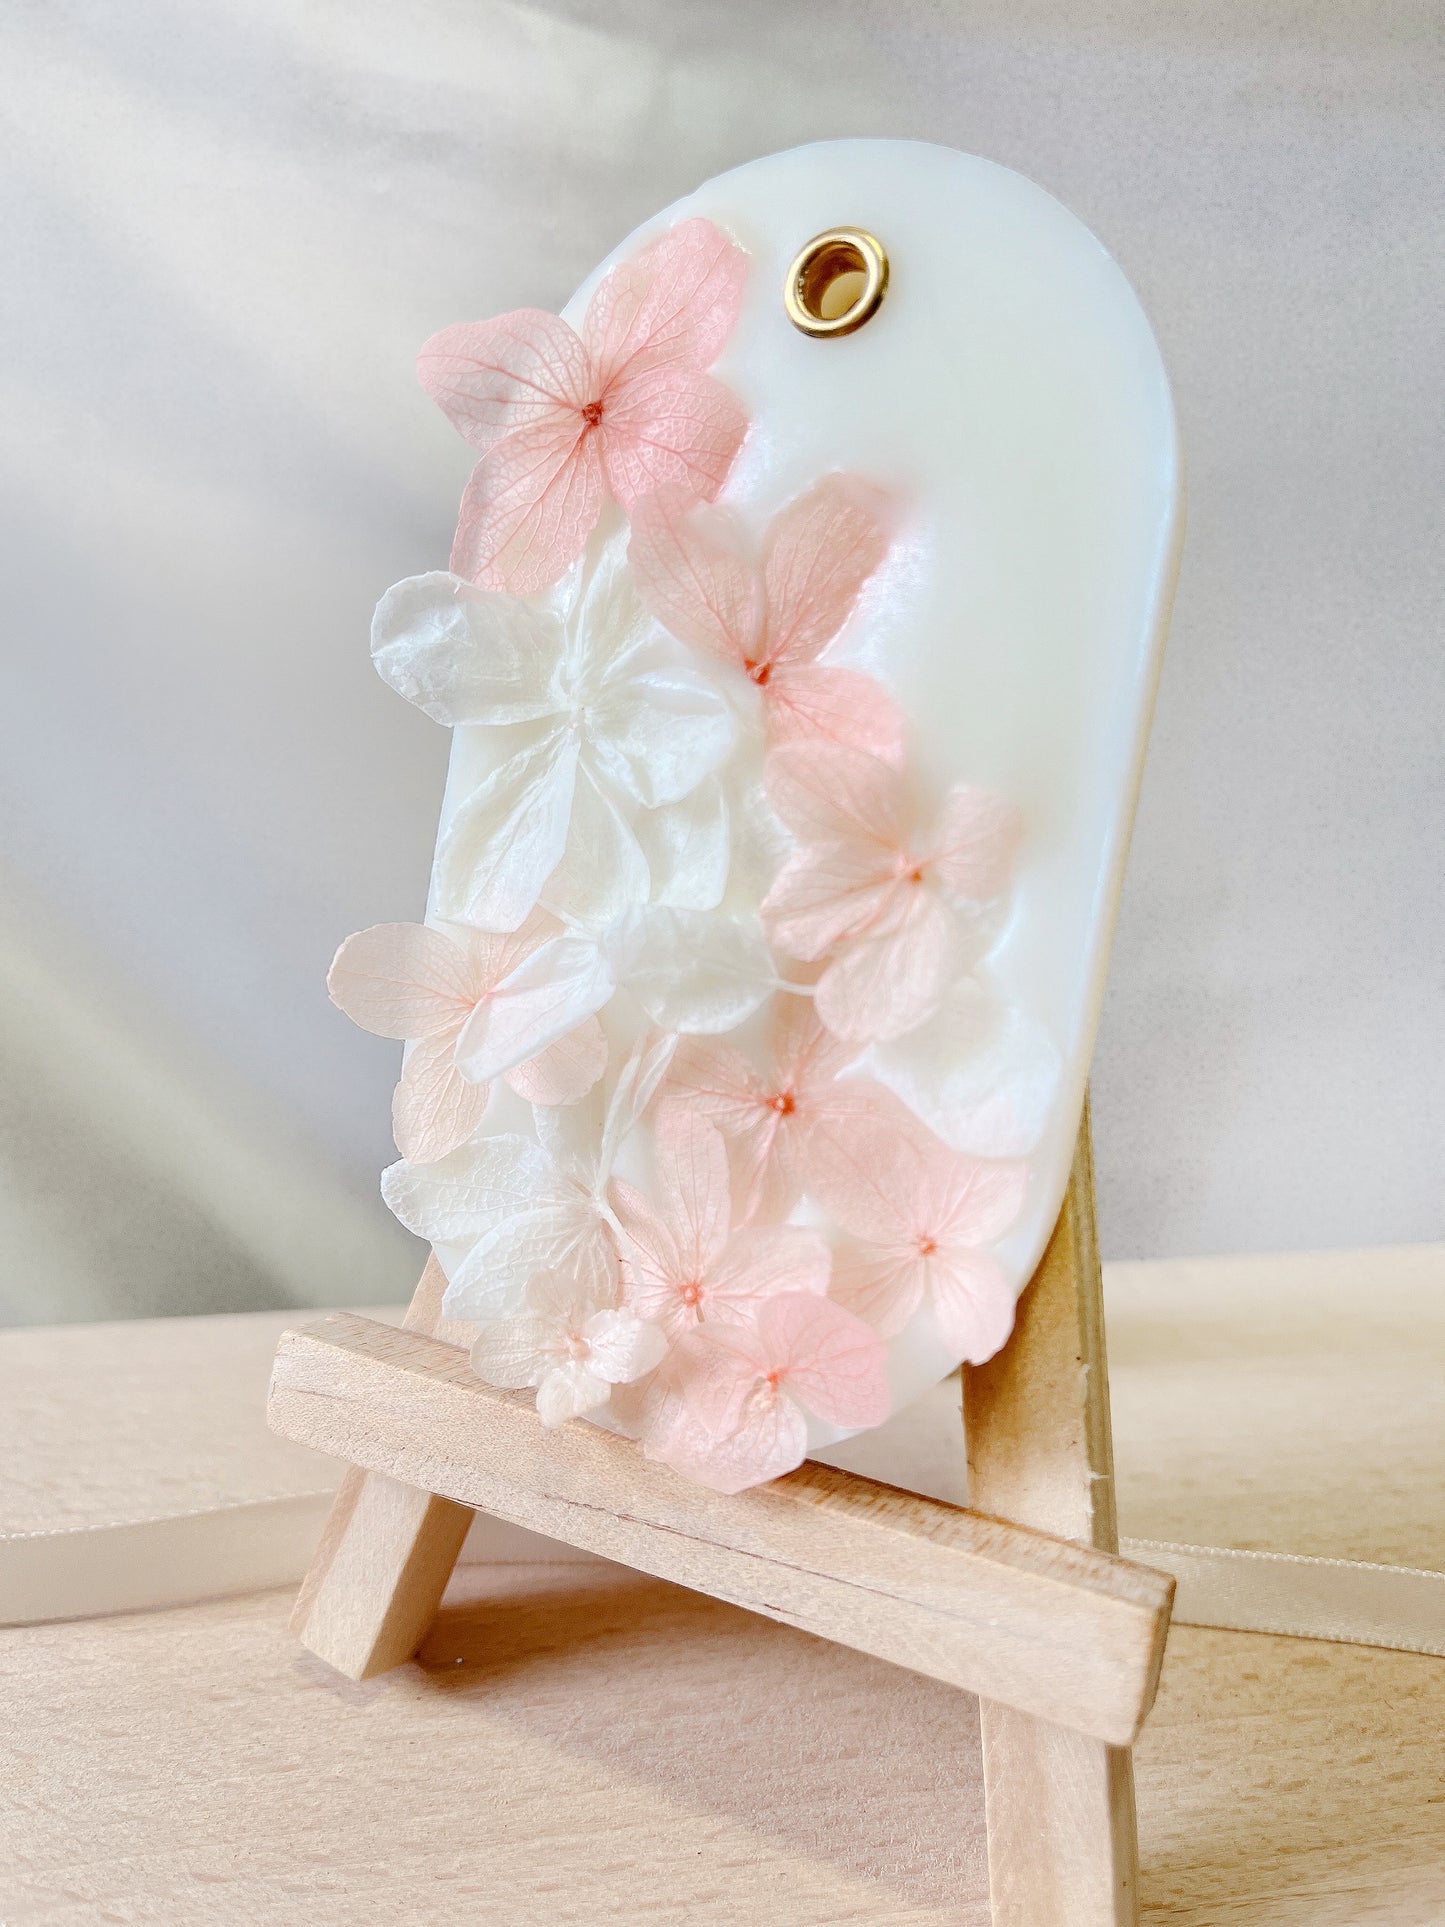 Flower Scented Wax Tablet: Cherry Blossom